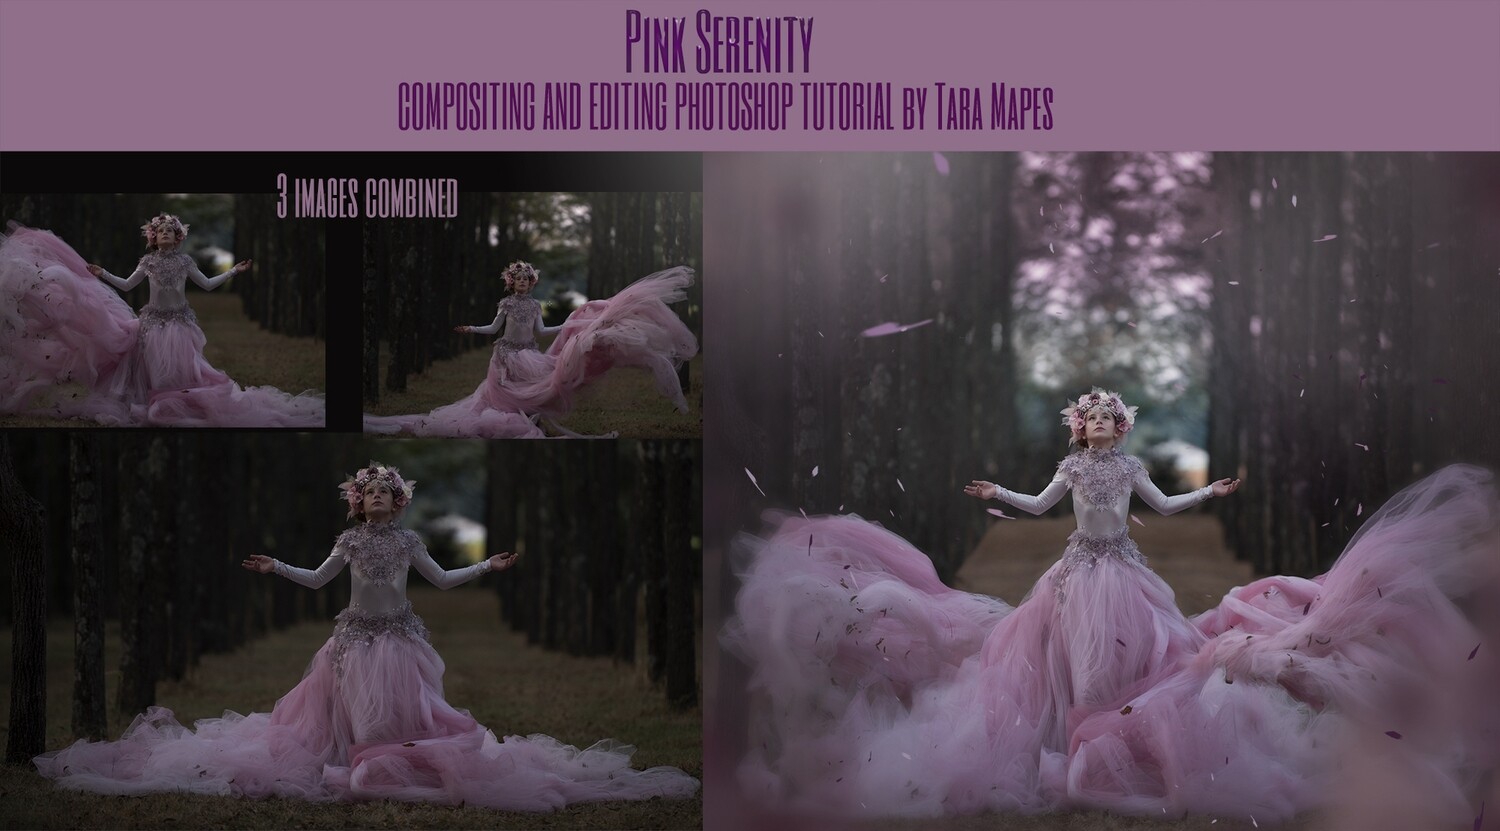 Pink Serenity Compositing and Editing Photoshop Tutorial by Tara Mapes